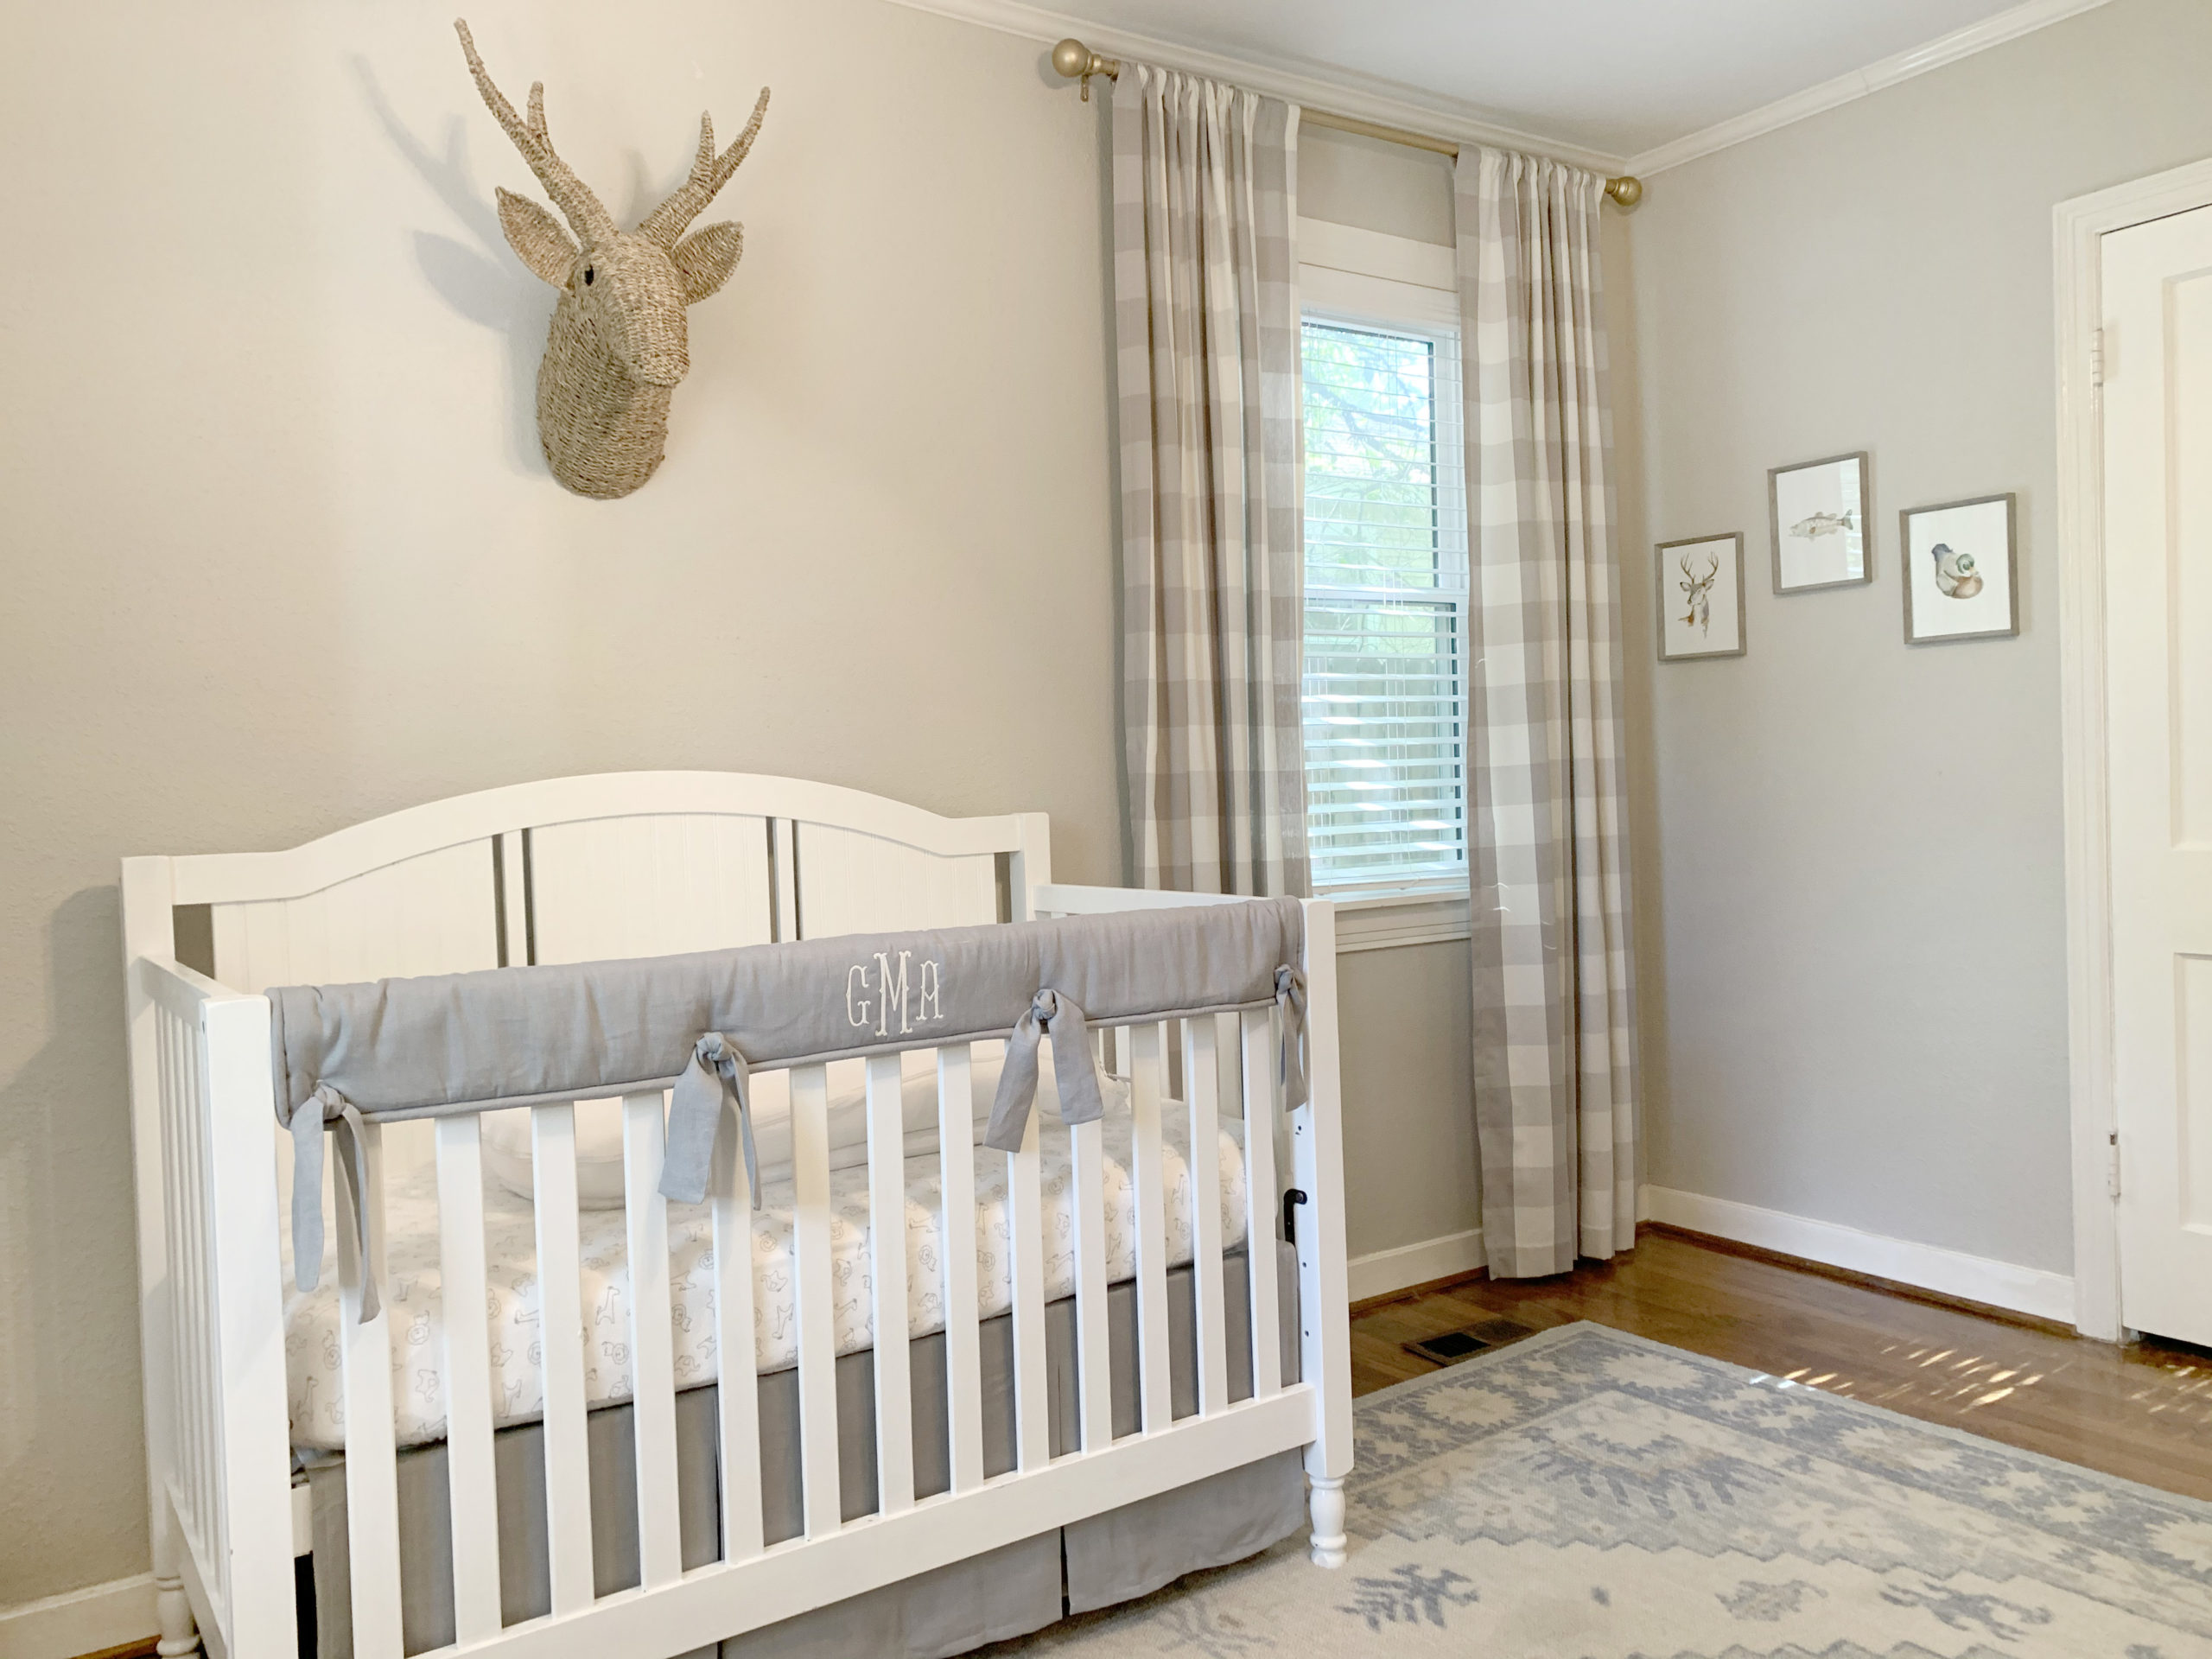 A Hunting Nursery with Classic Style - Project Nursery